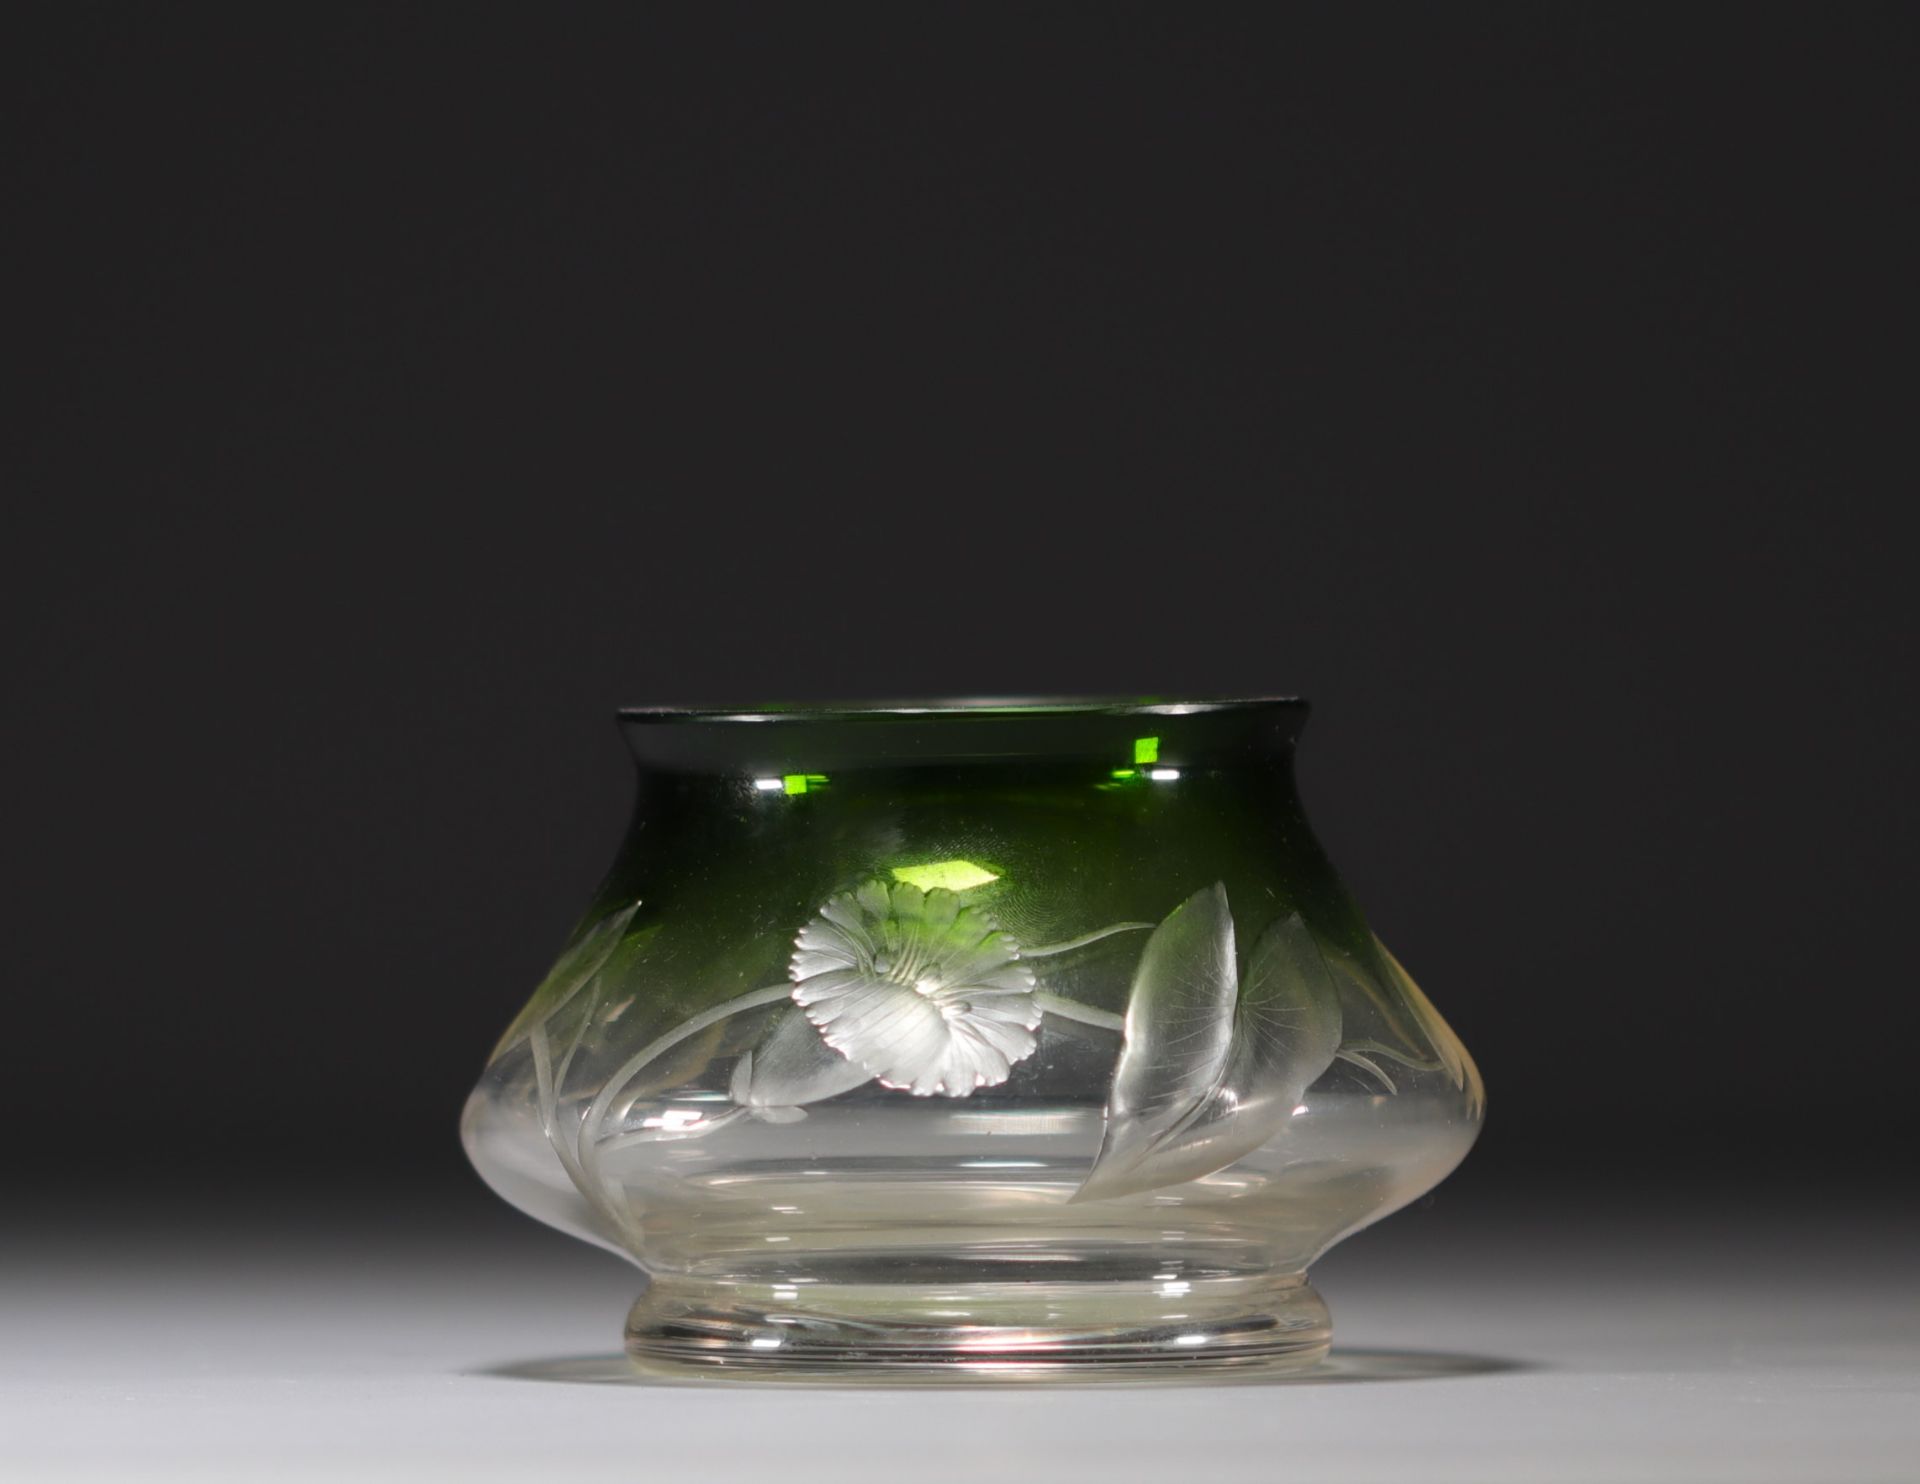 MOSER Karlsbad - Small vase with floral decoration in shades of green, circa 1900.